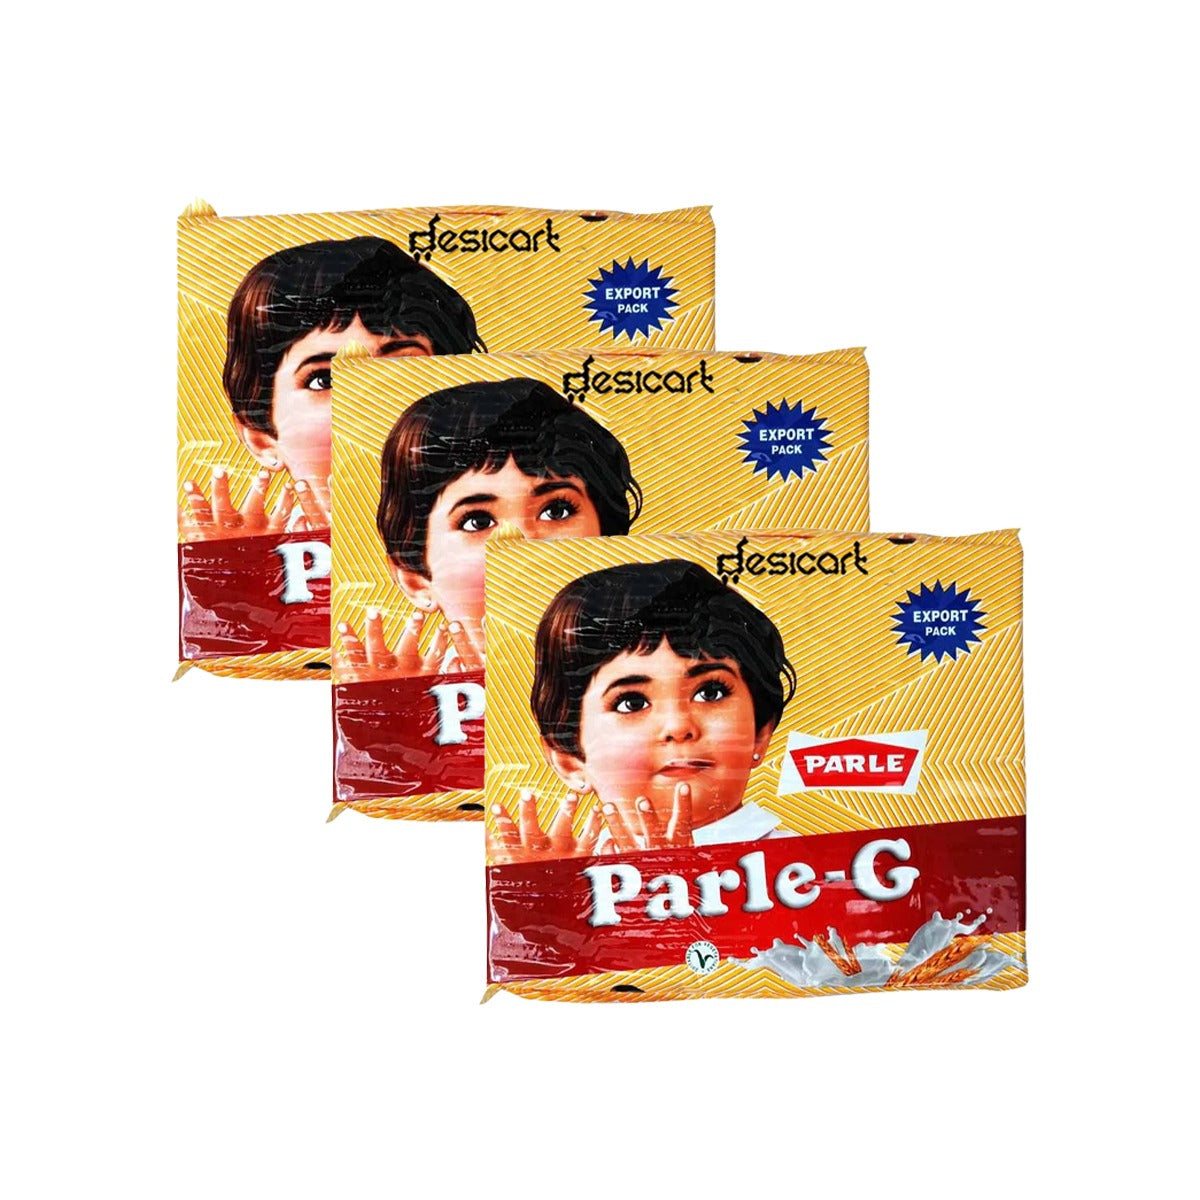 Parle-G 79.9g (Pack of 3)